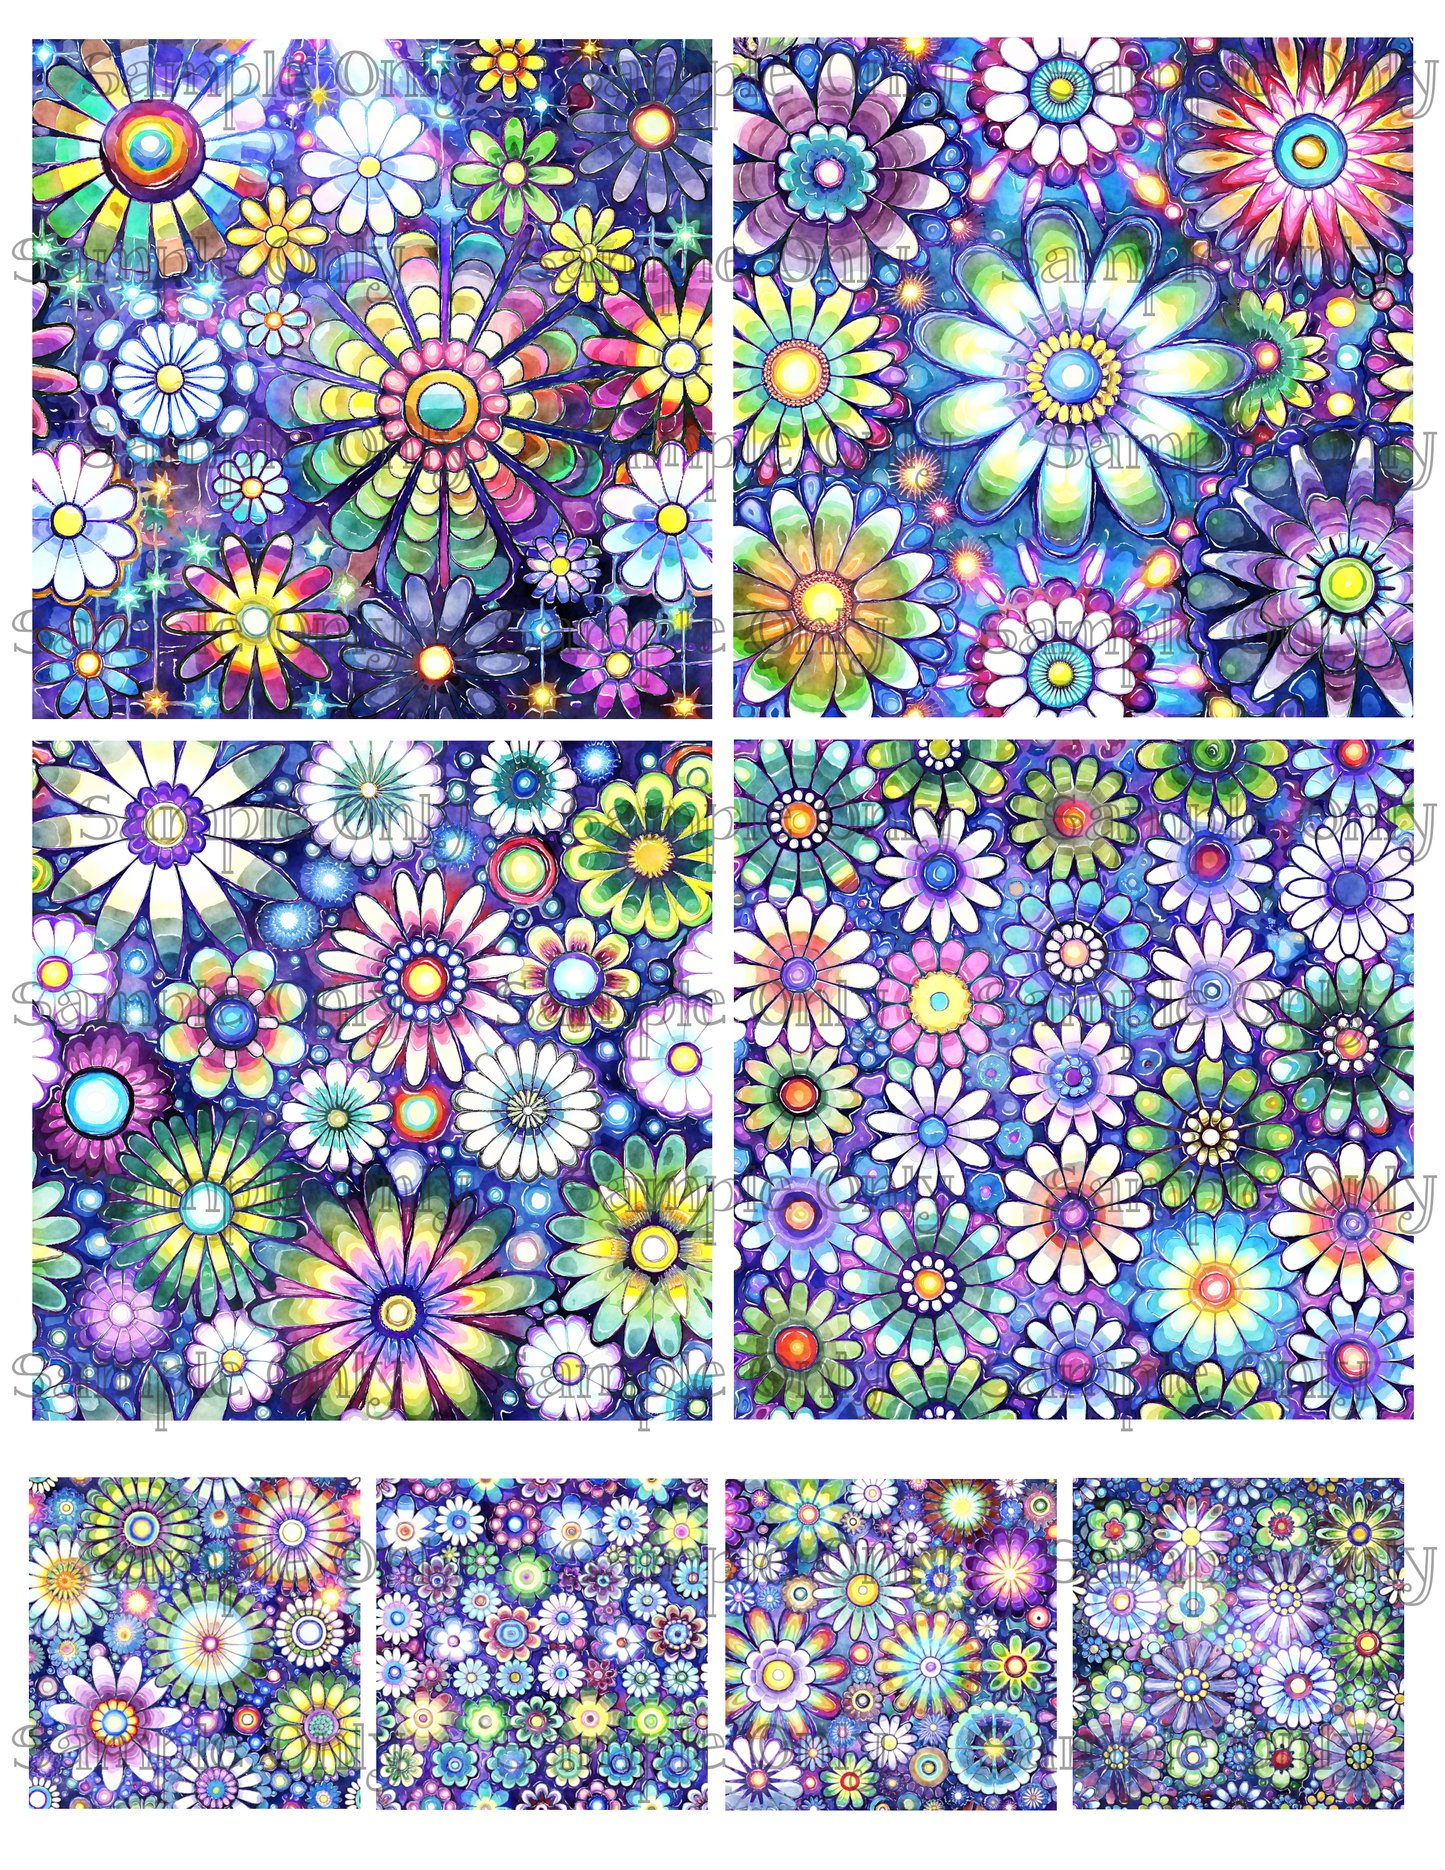 4 Inch Night Blooms Floral Image Sheet For Polymer Clay Transfer Decal DIGITAL FILE OR PRINTED